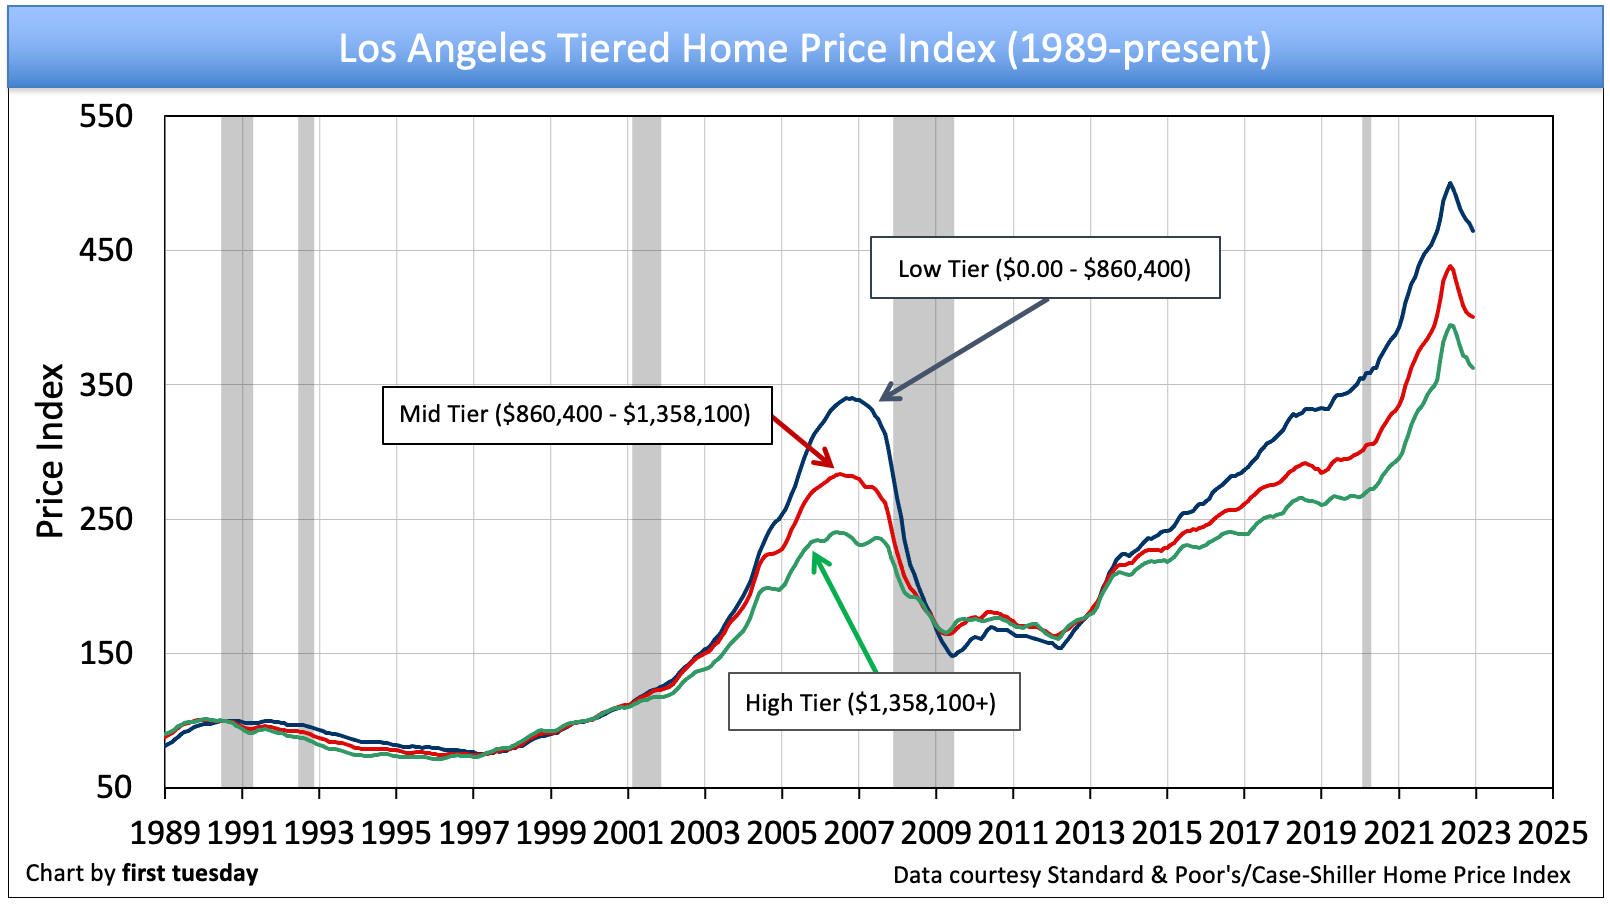 This chart depicts home price movement in Los Angeles's three price tiers.